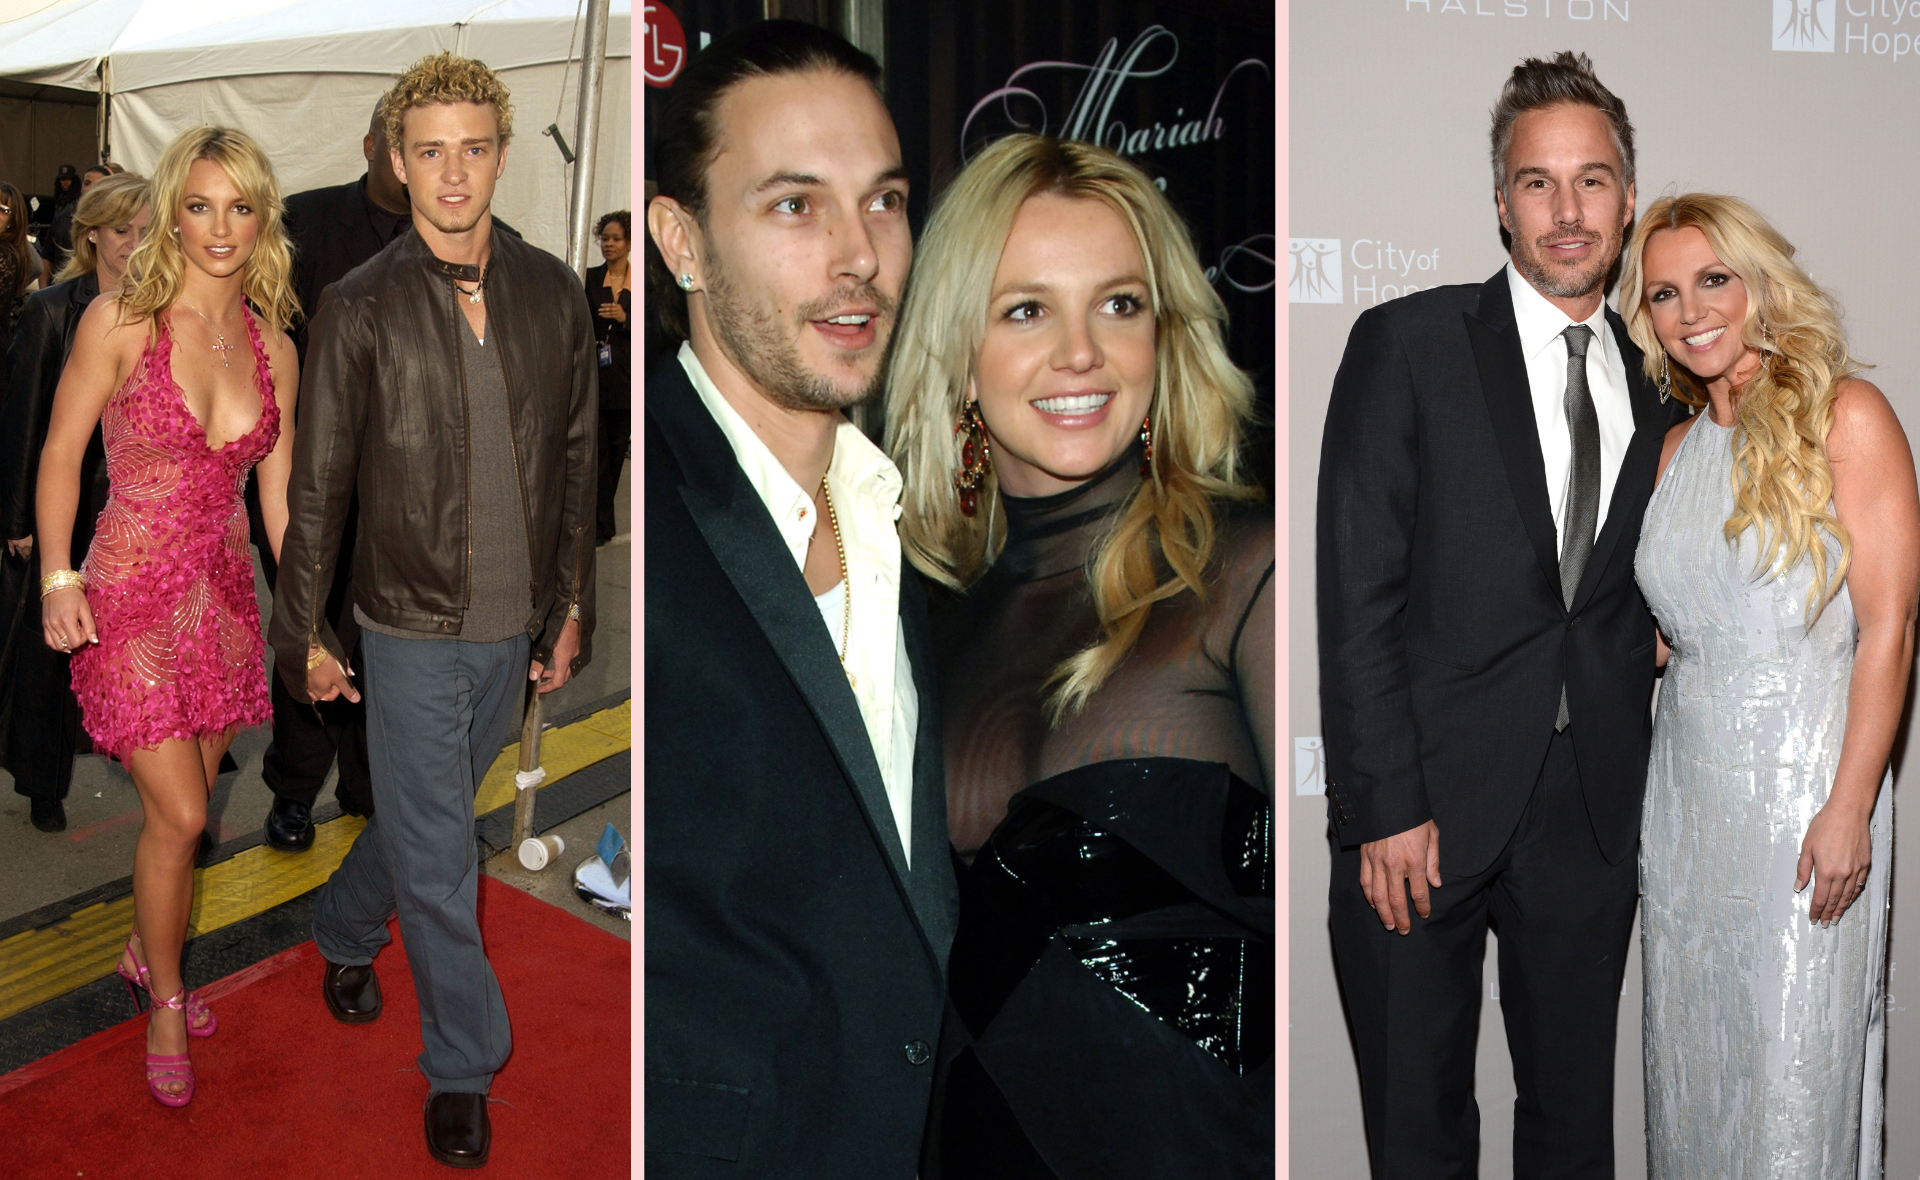 From Justin Timberlake to Kevin Federline: Look back at Britney Spears’ relationship history